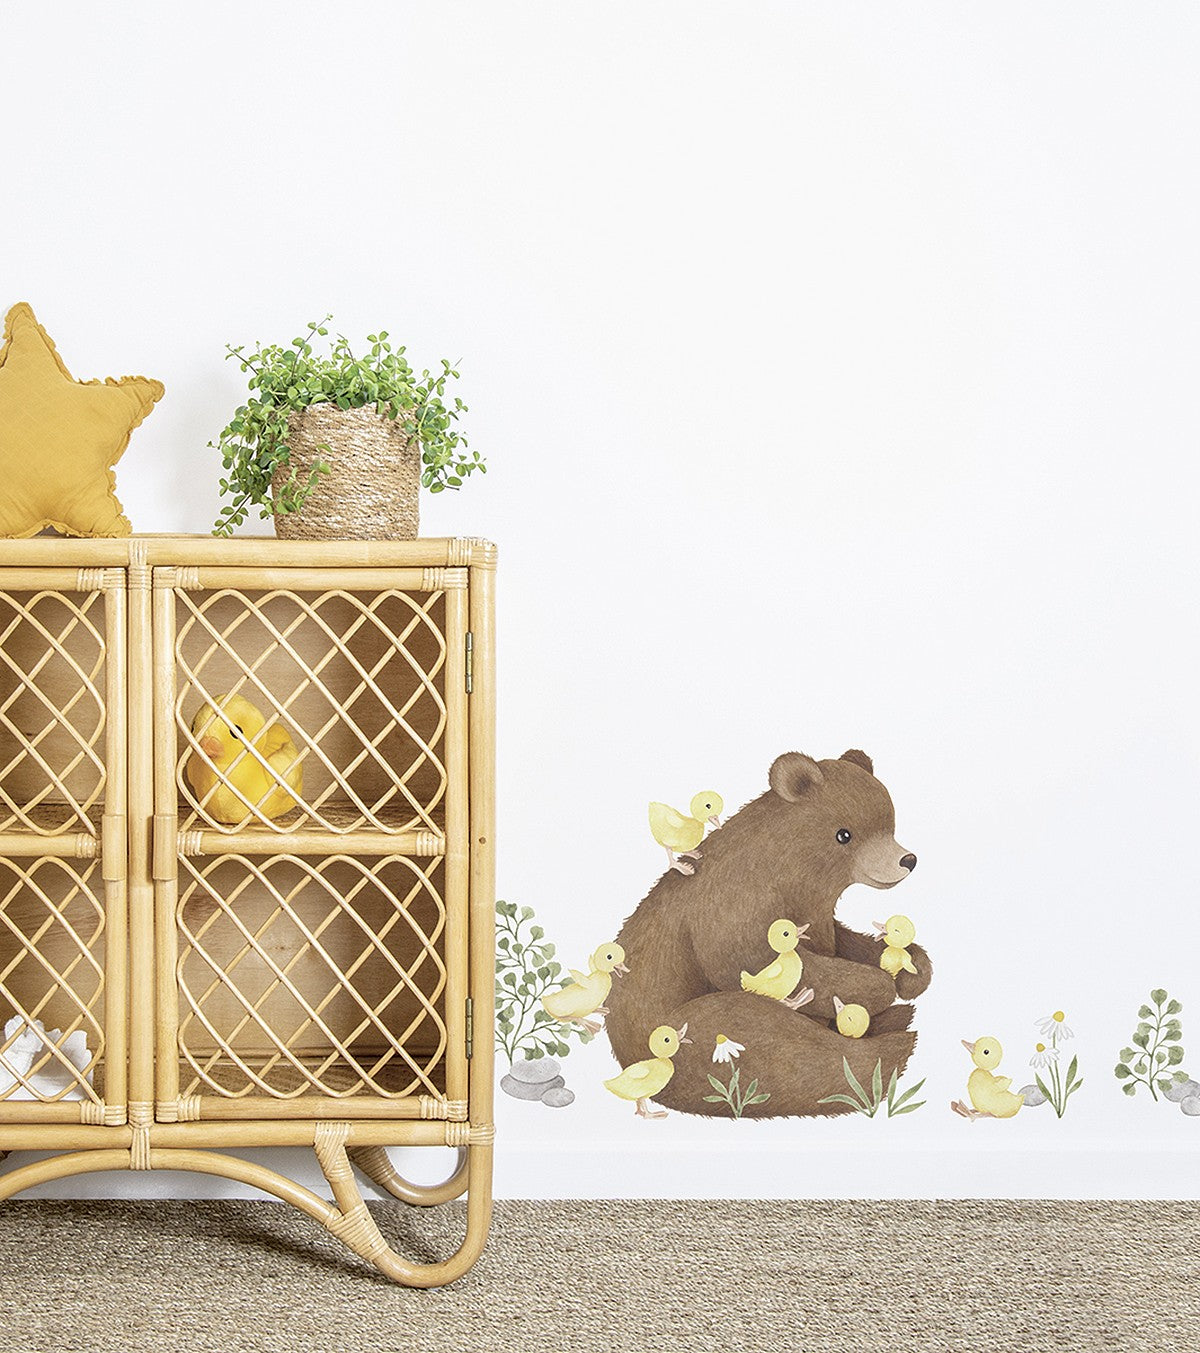 Lucky Ducky - Wall Decals Murals - Brown Bear And Ducklings